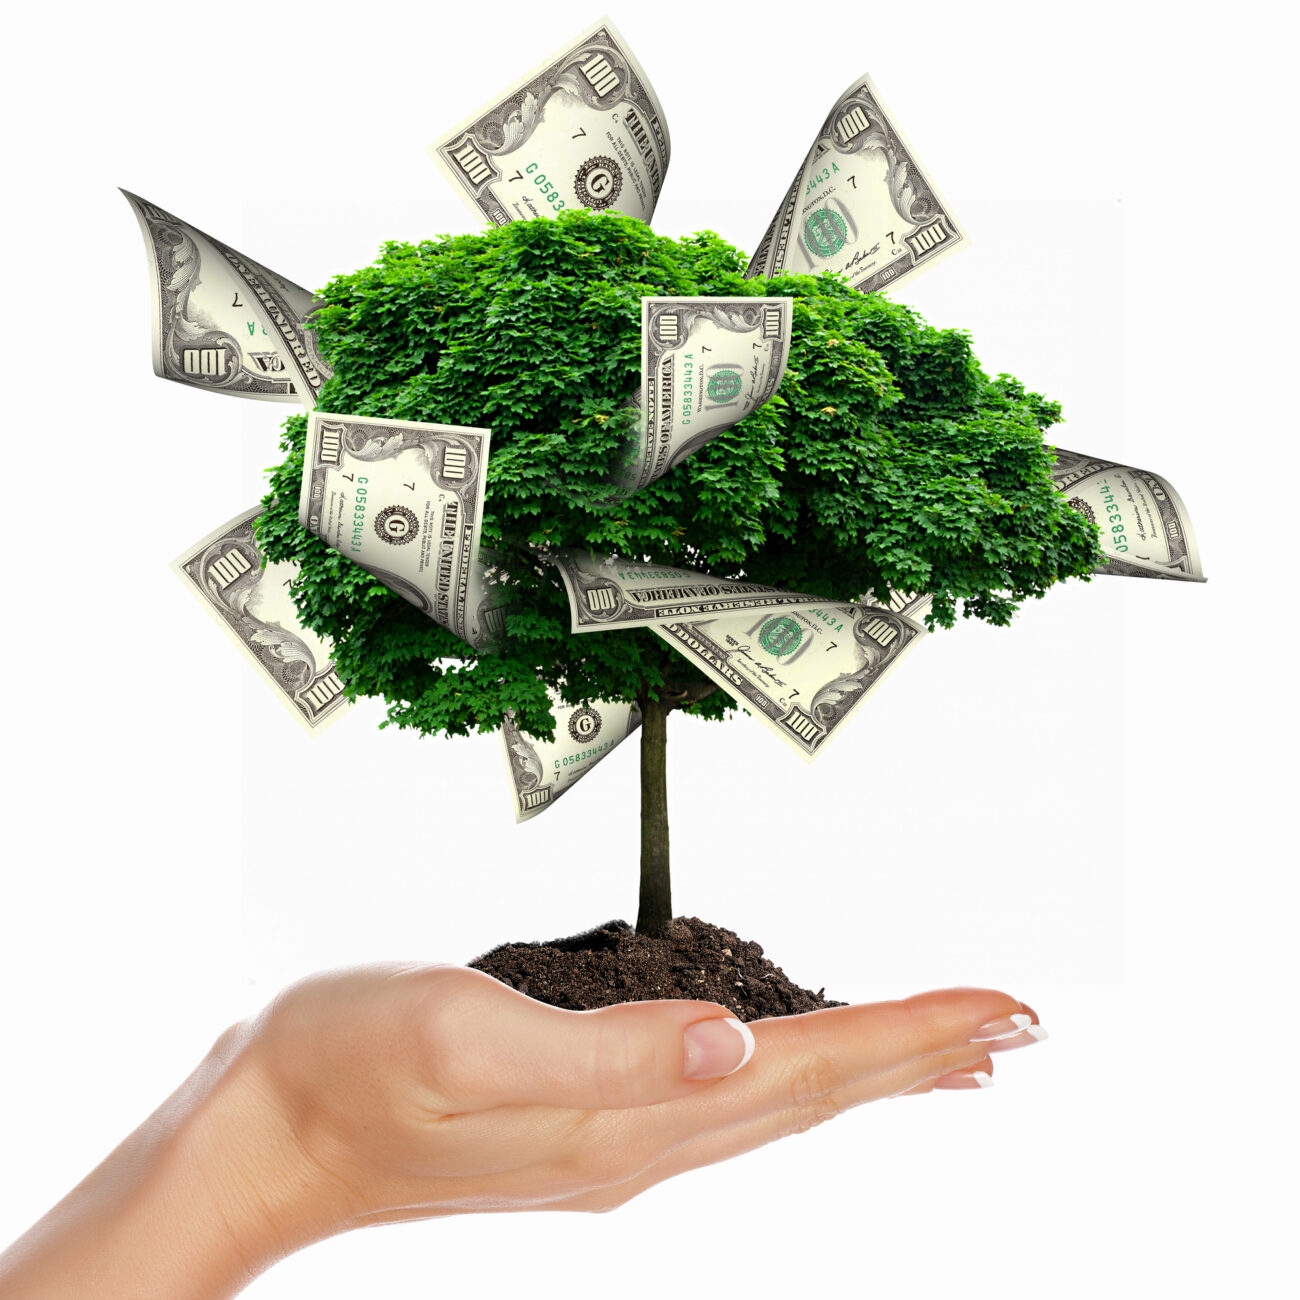 Money Tree with cuts on his hand of man. a symbol of financial success.